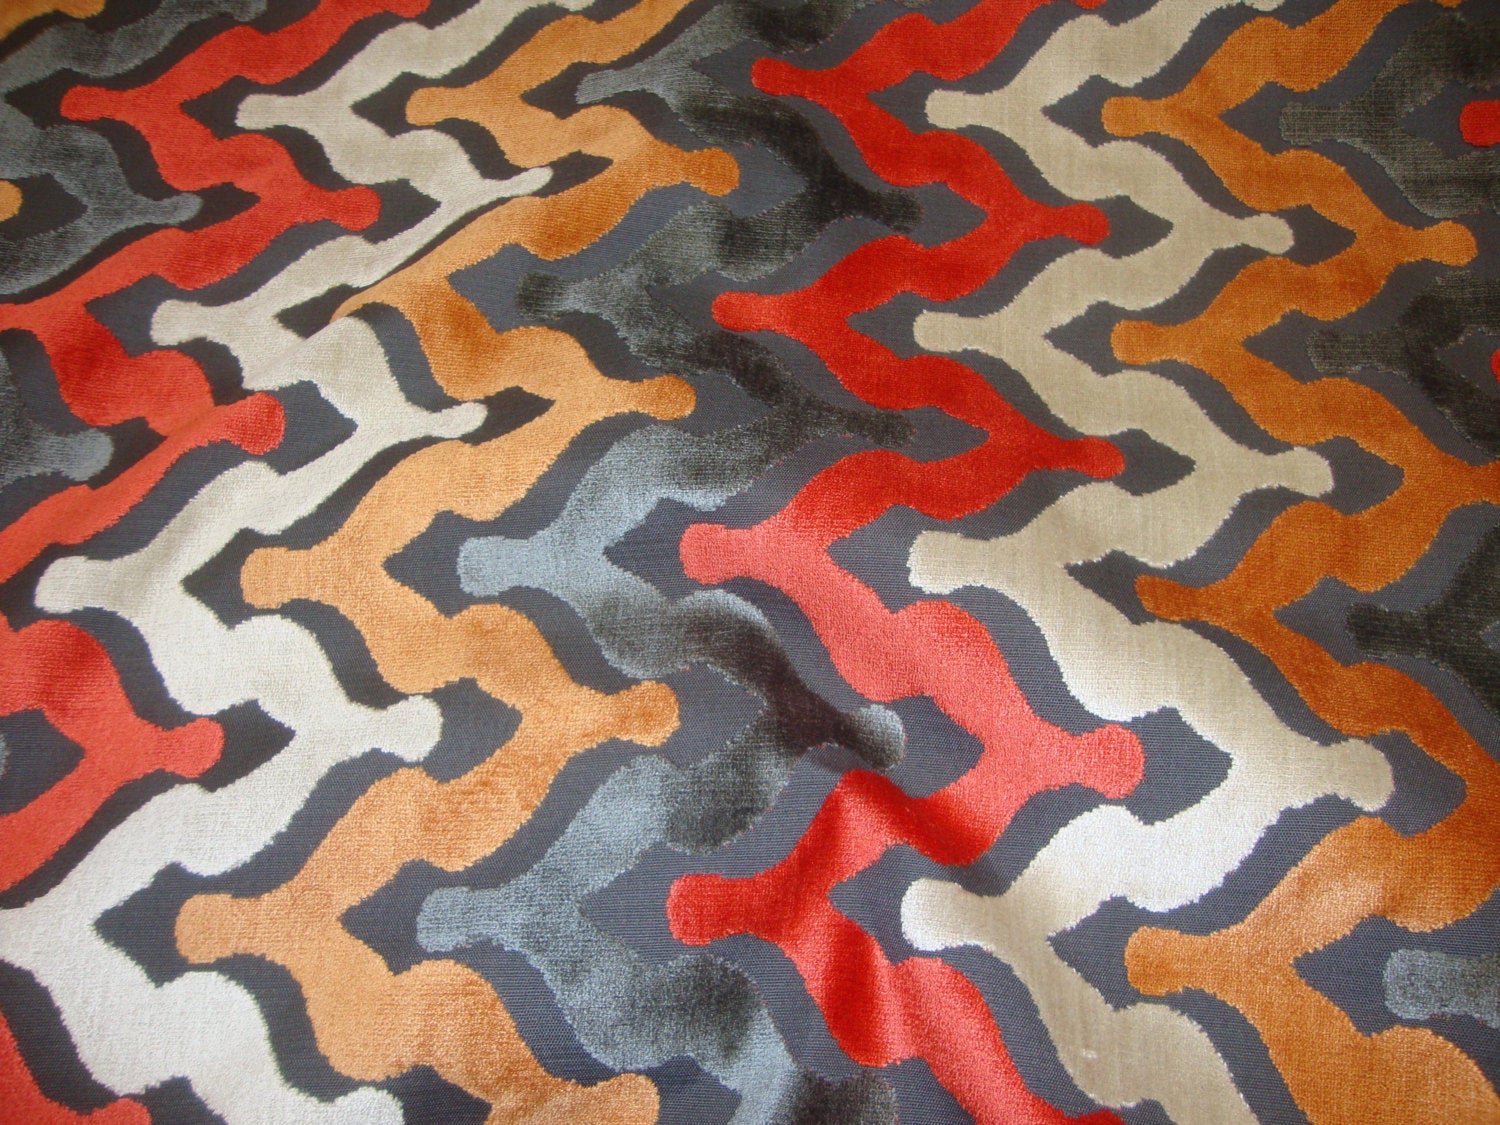 atomic-wave-embossed-raised-velvet-55-56-wide-upholstery-fabric-by-the-yard